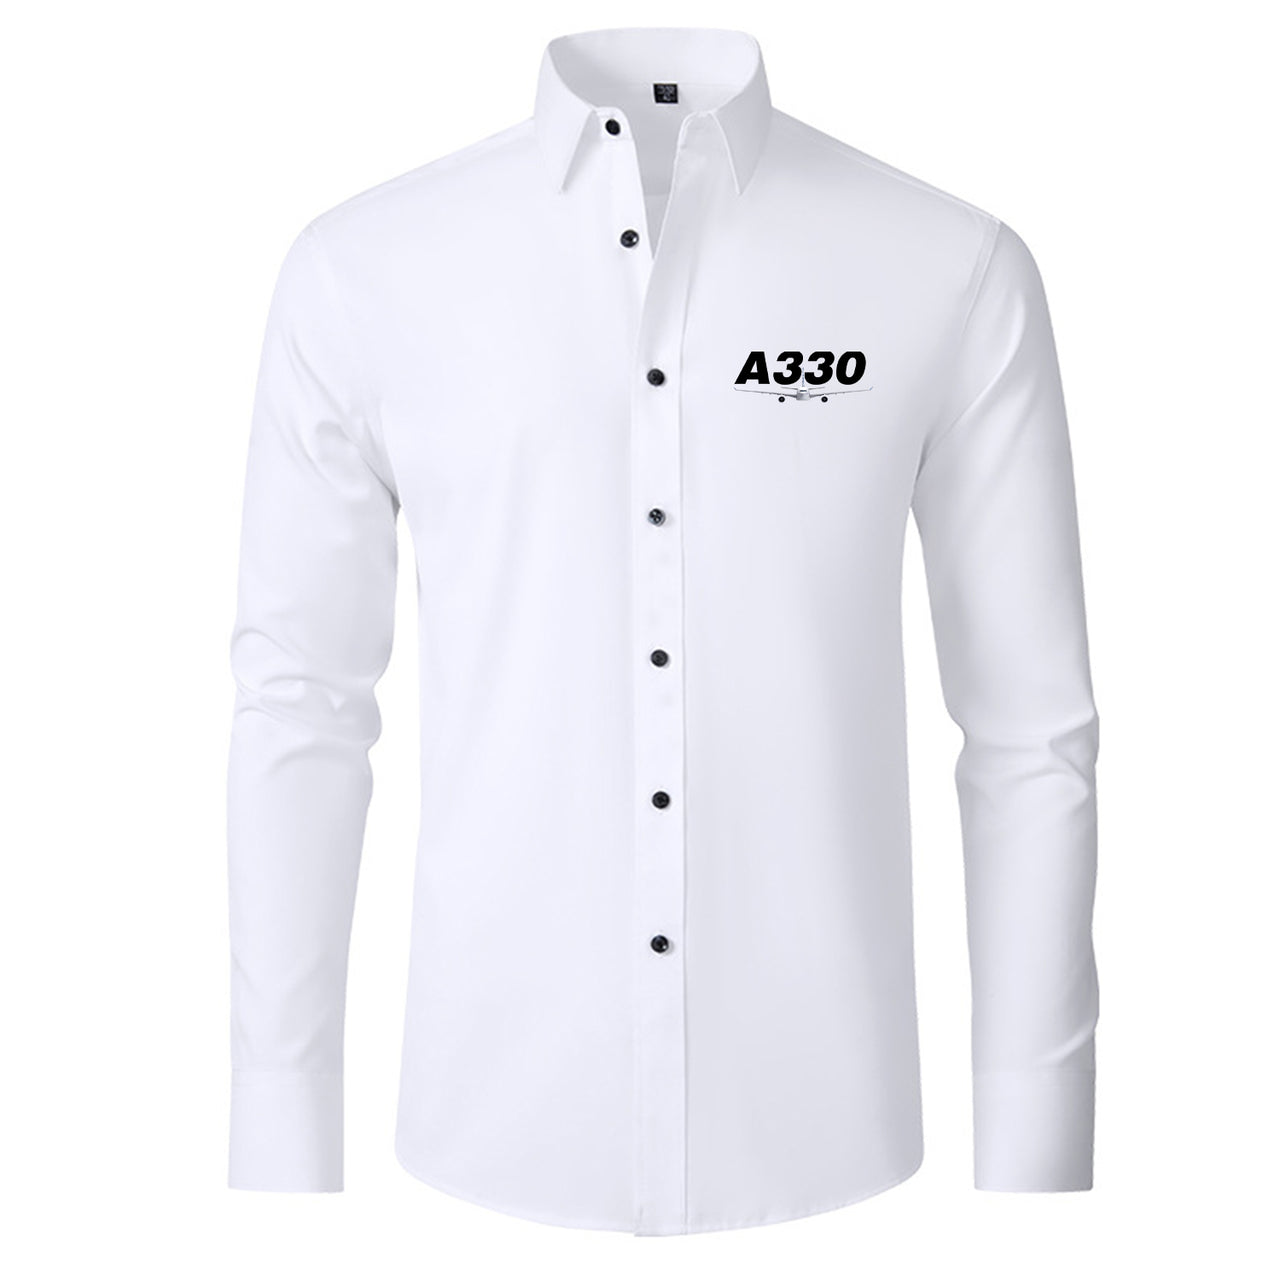 Super Airbus A330 Designed Long Sleeve Shirts